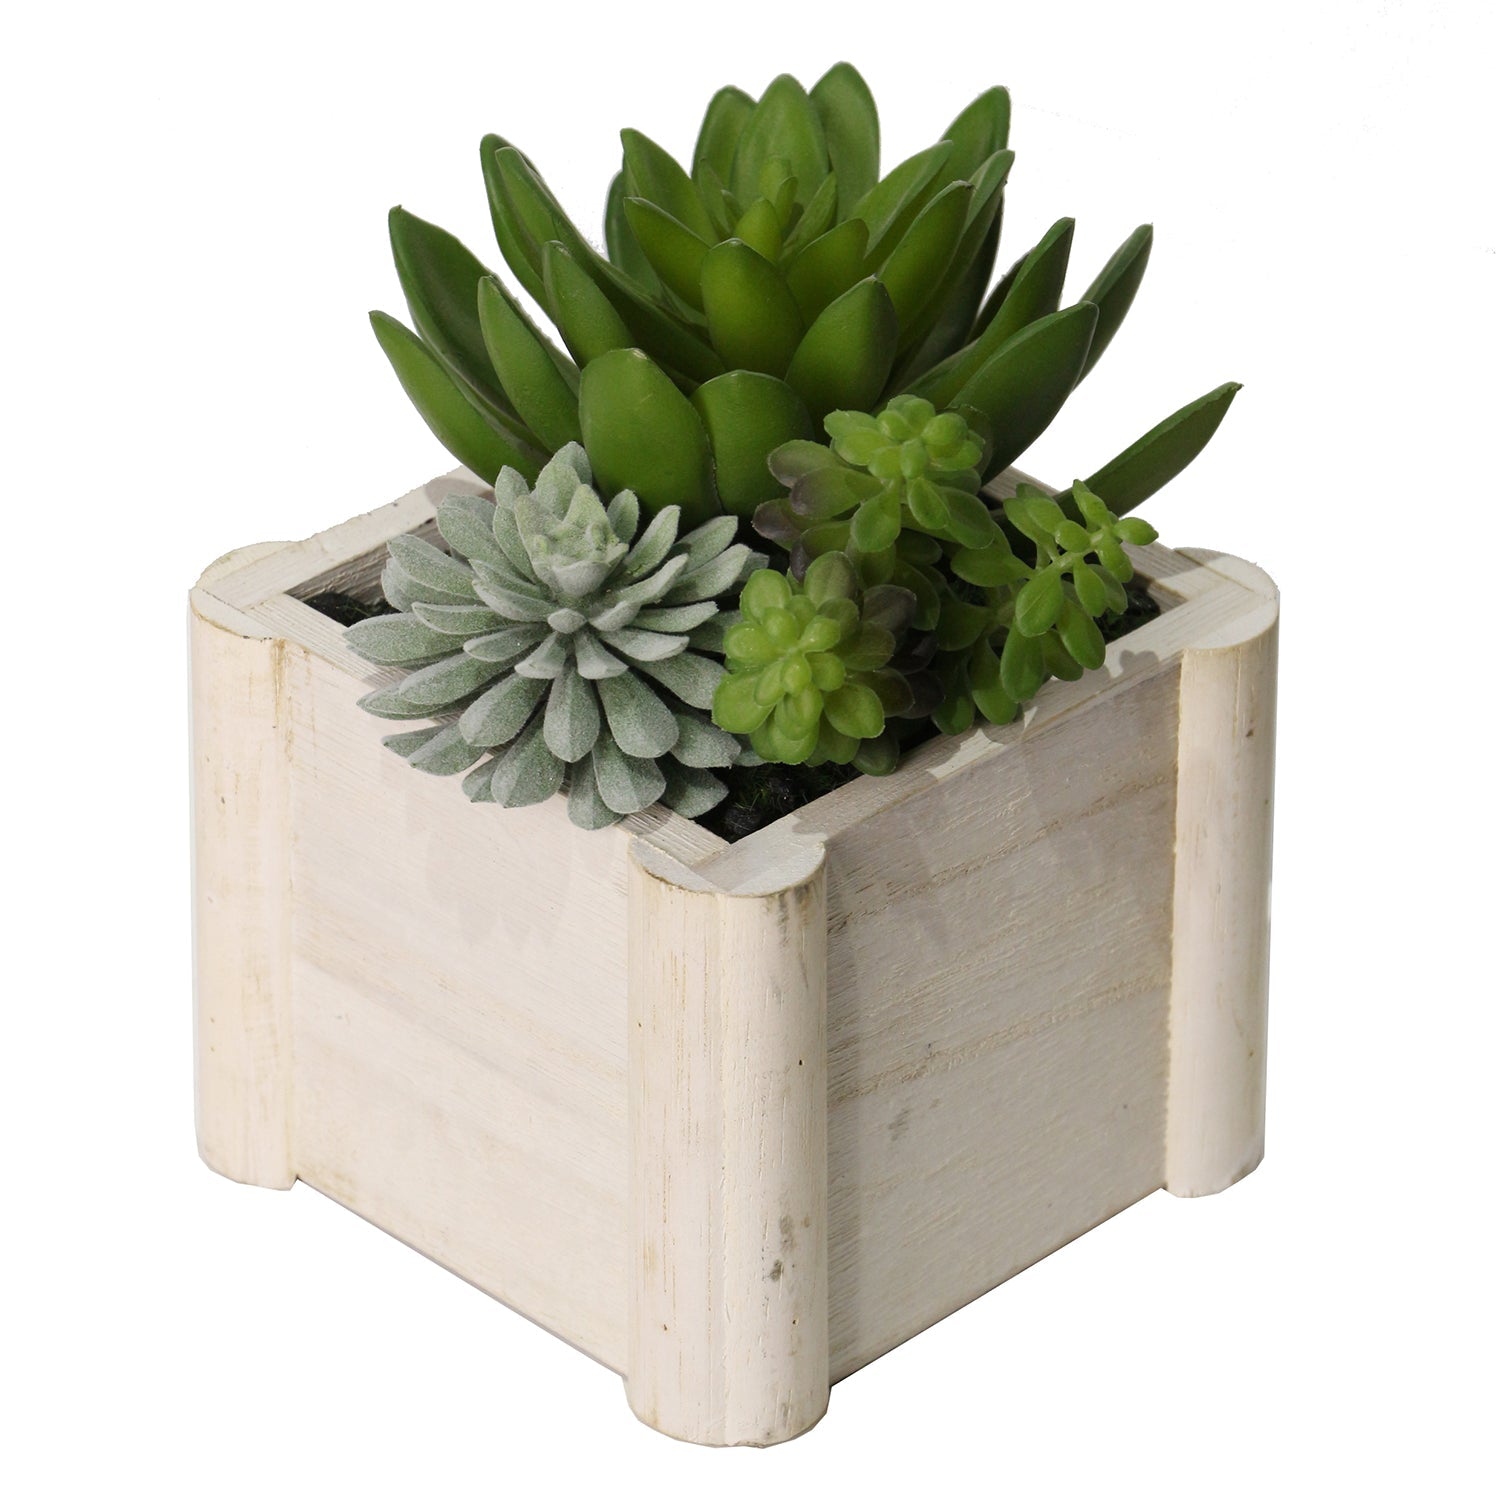 Green Fusion Lifelike Plant in Rustic Wooden Pot